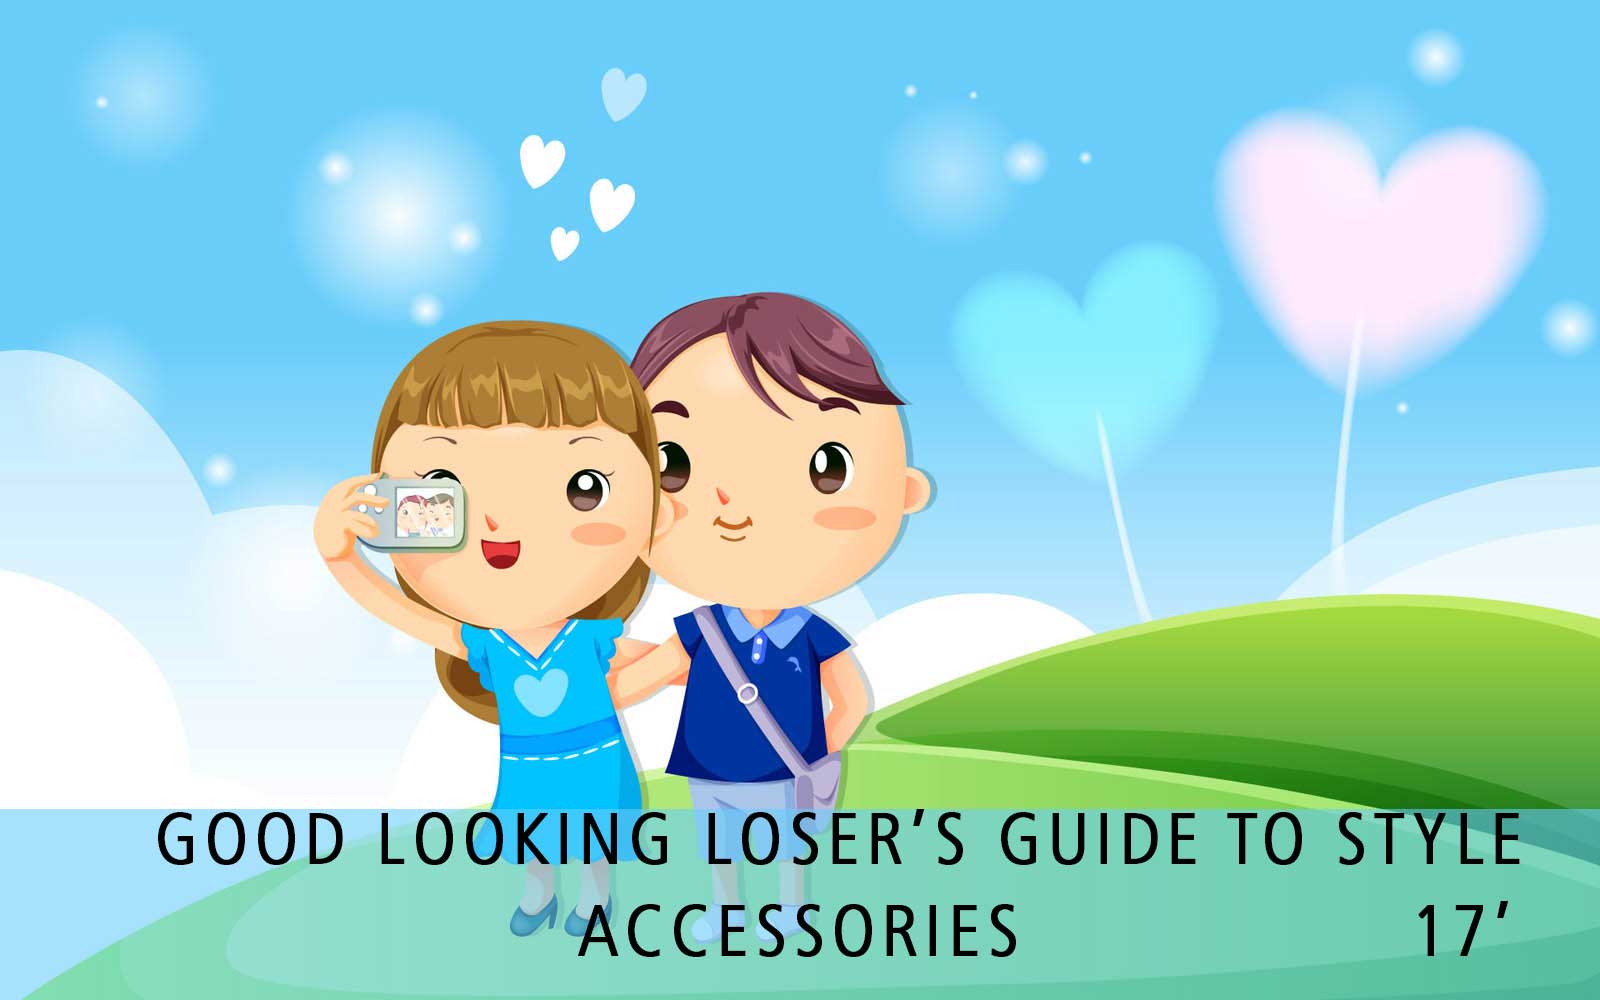 Good Looking Loser's Summer 2017 Guide to Style (Accessories)